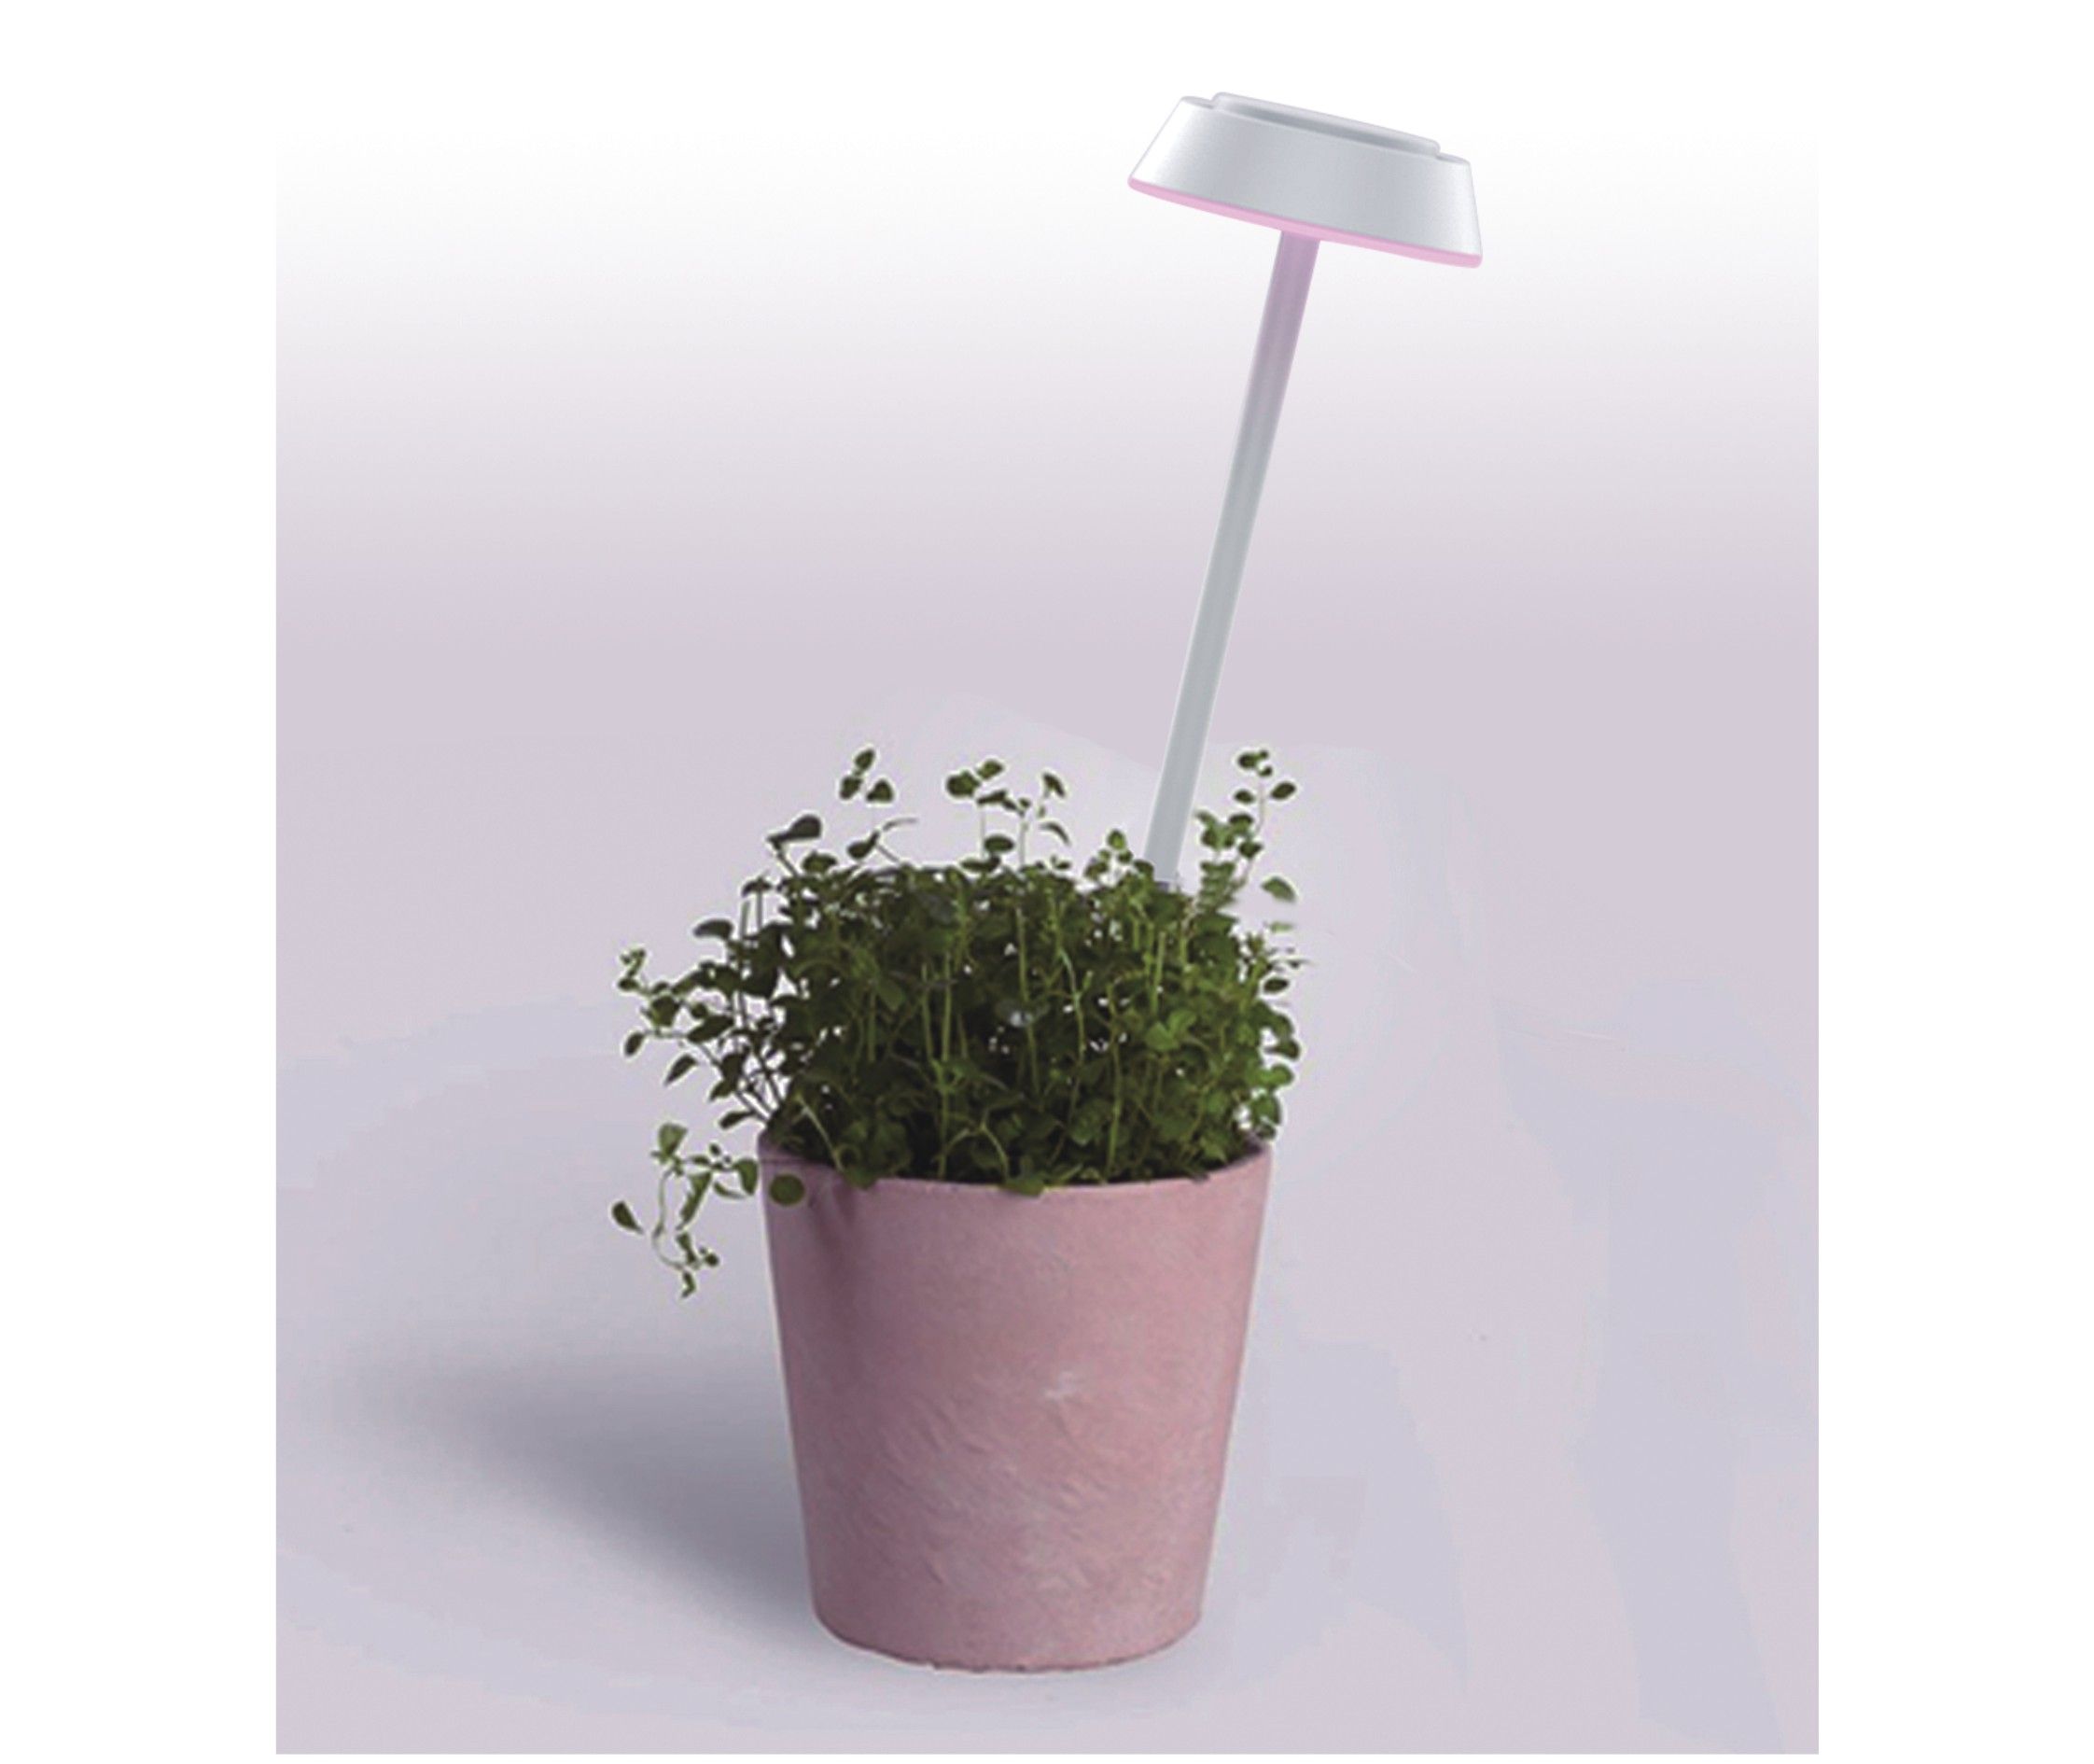 2-in-1 LED Plant Grow Light